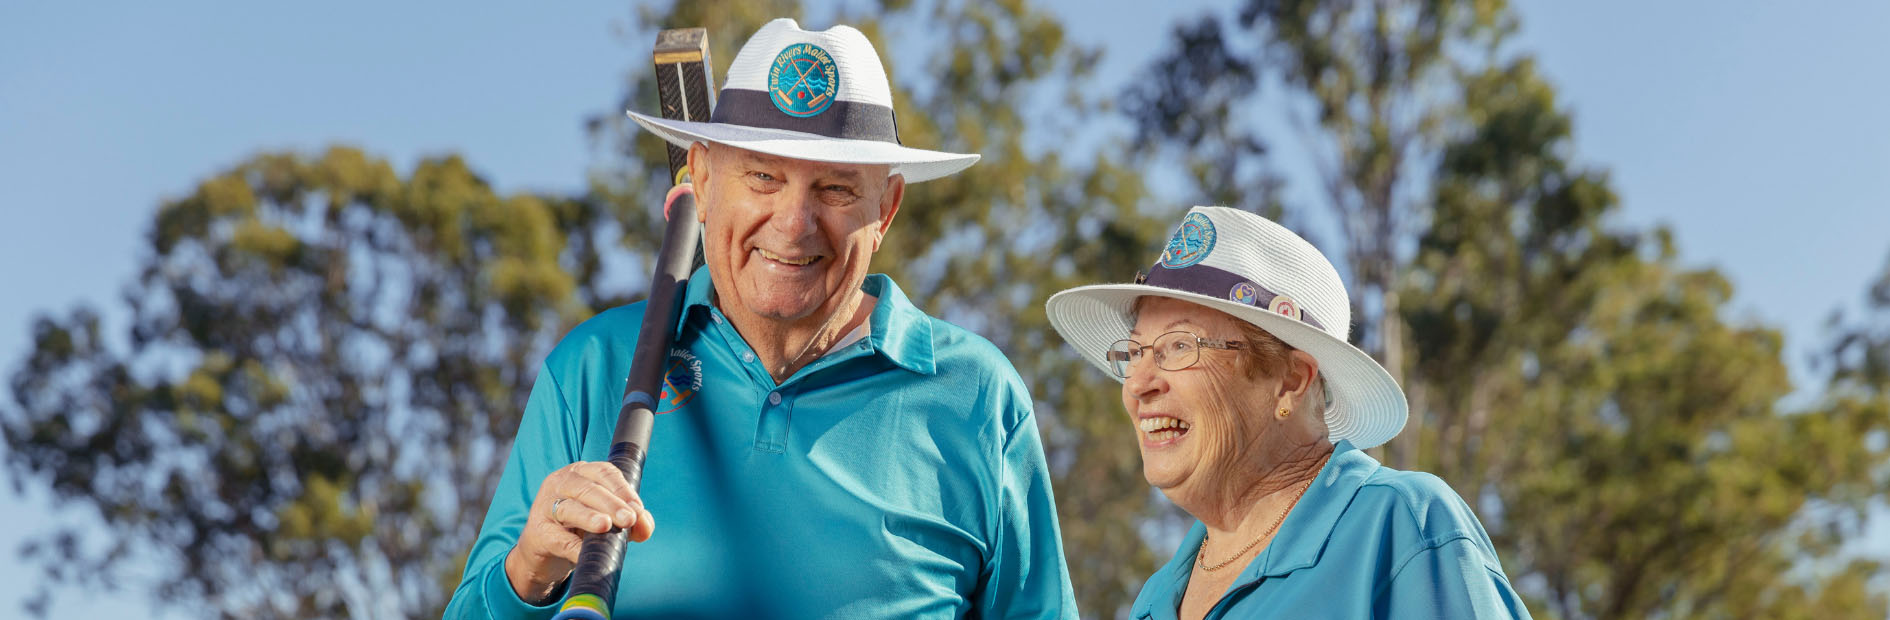 A elderly man and woman dressed in matching blue polo shirts carry gold clubs